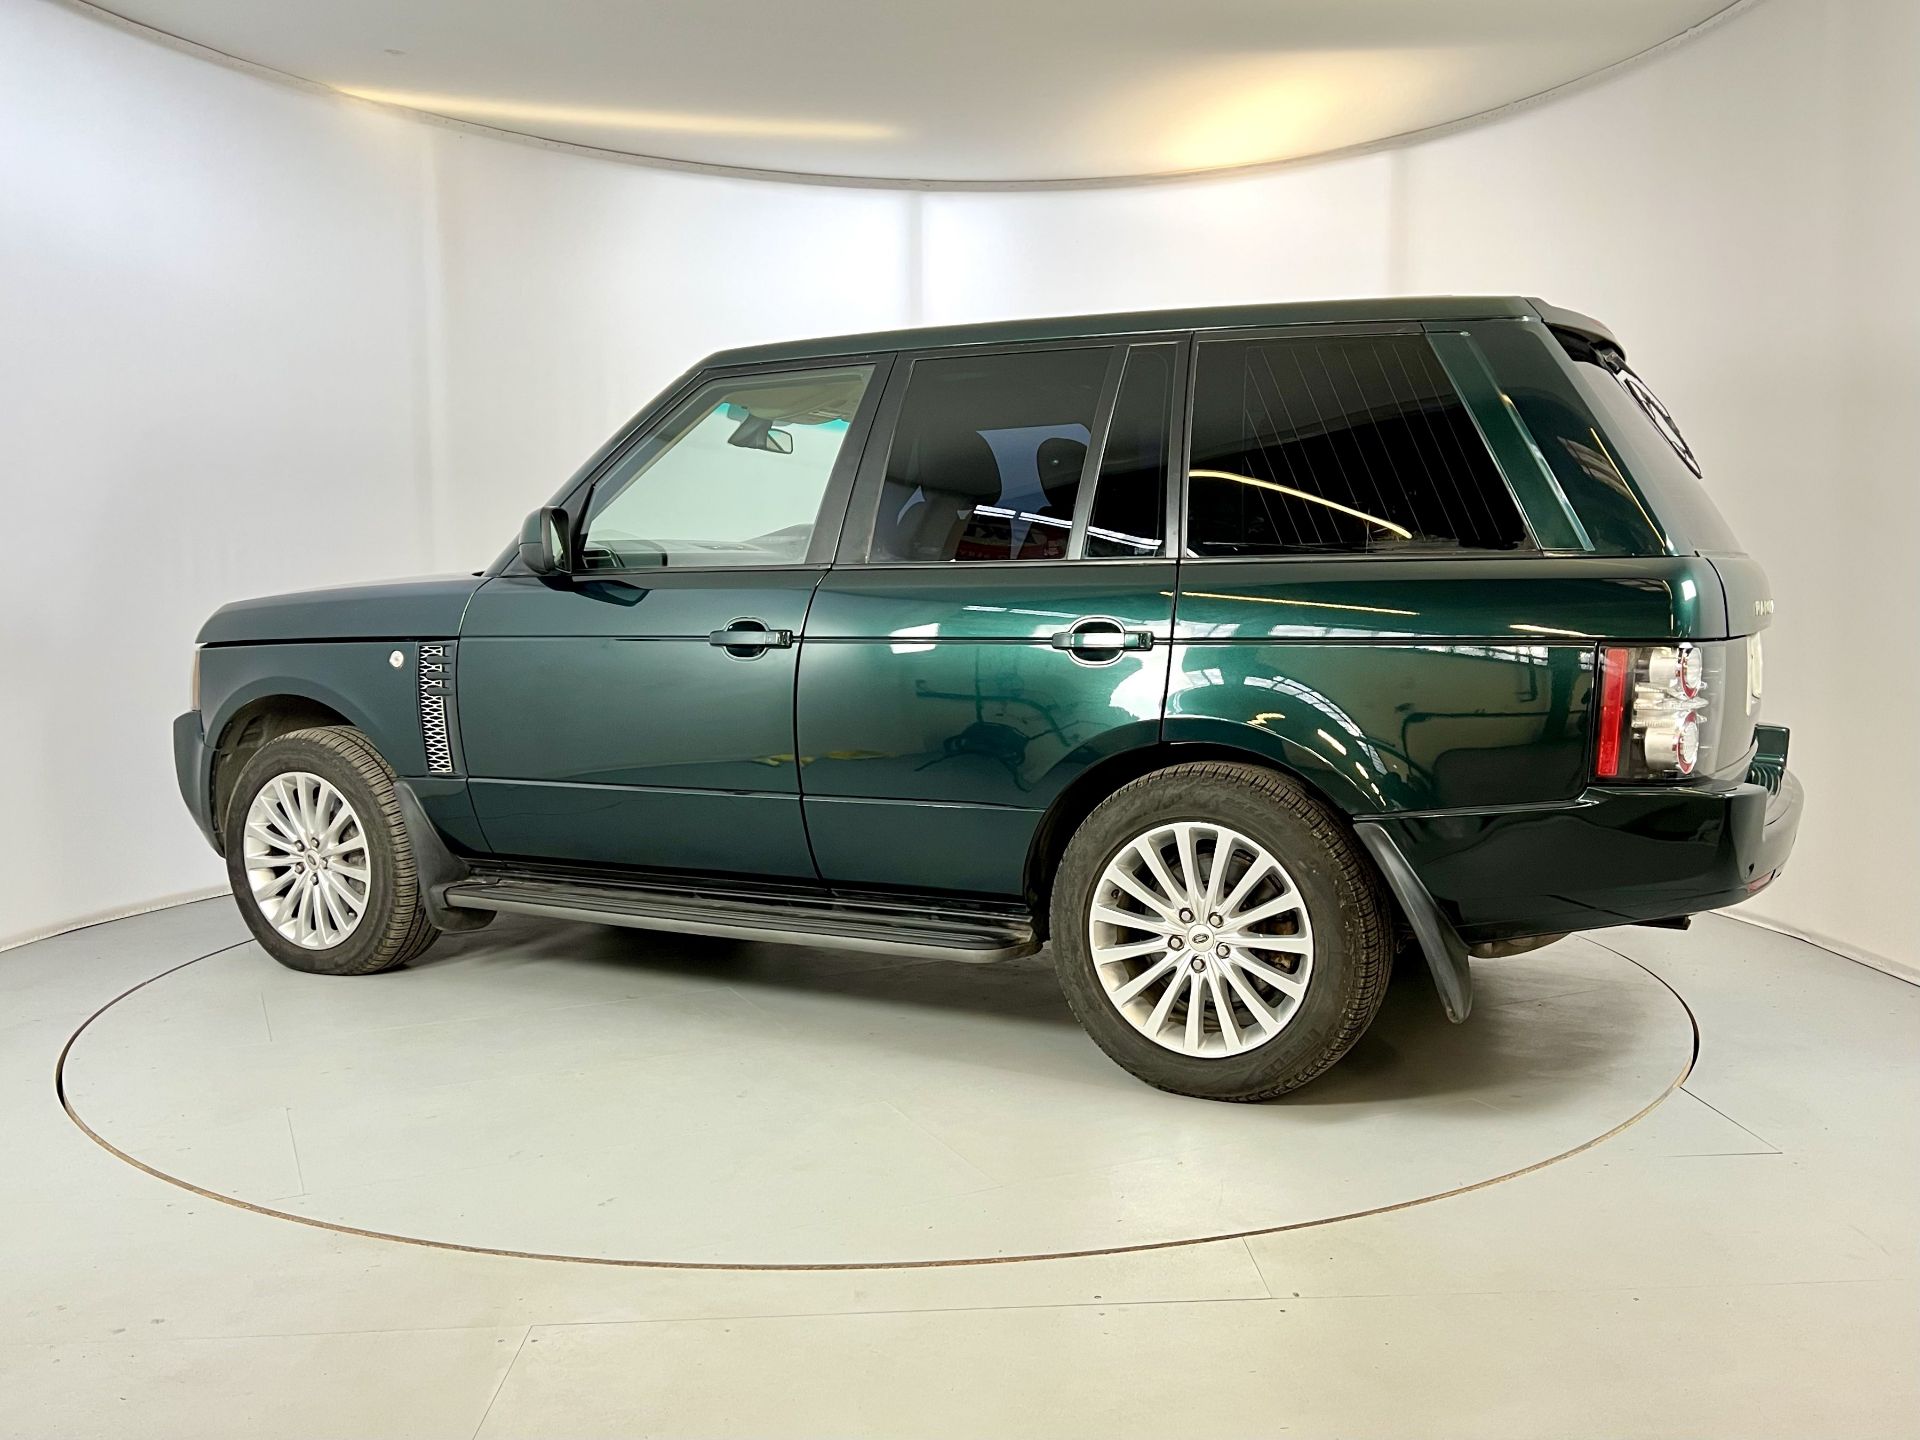 Land Rover Range Rover 4.4 Westminster - Image 6 of 30